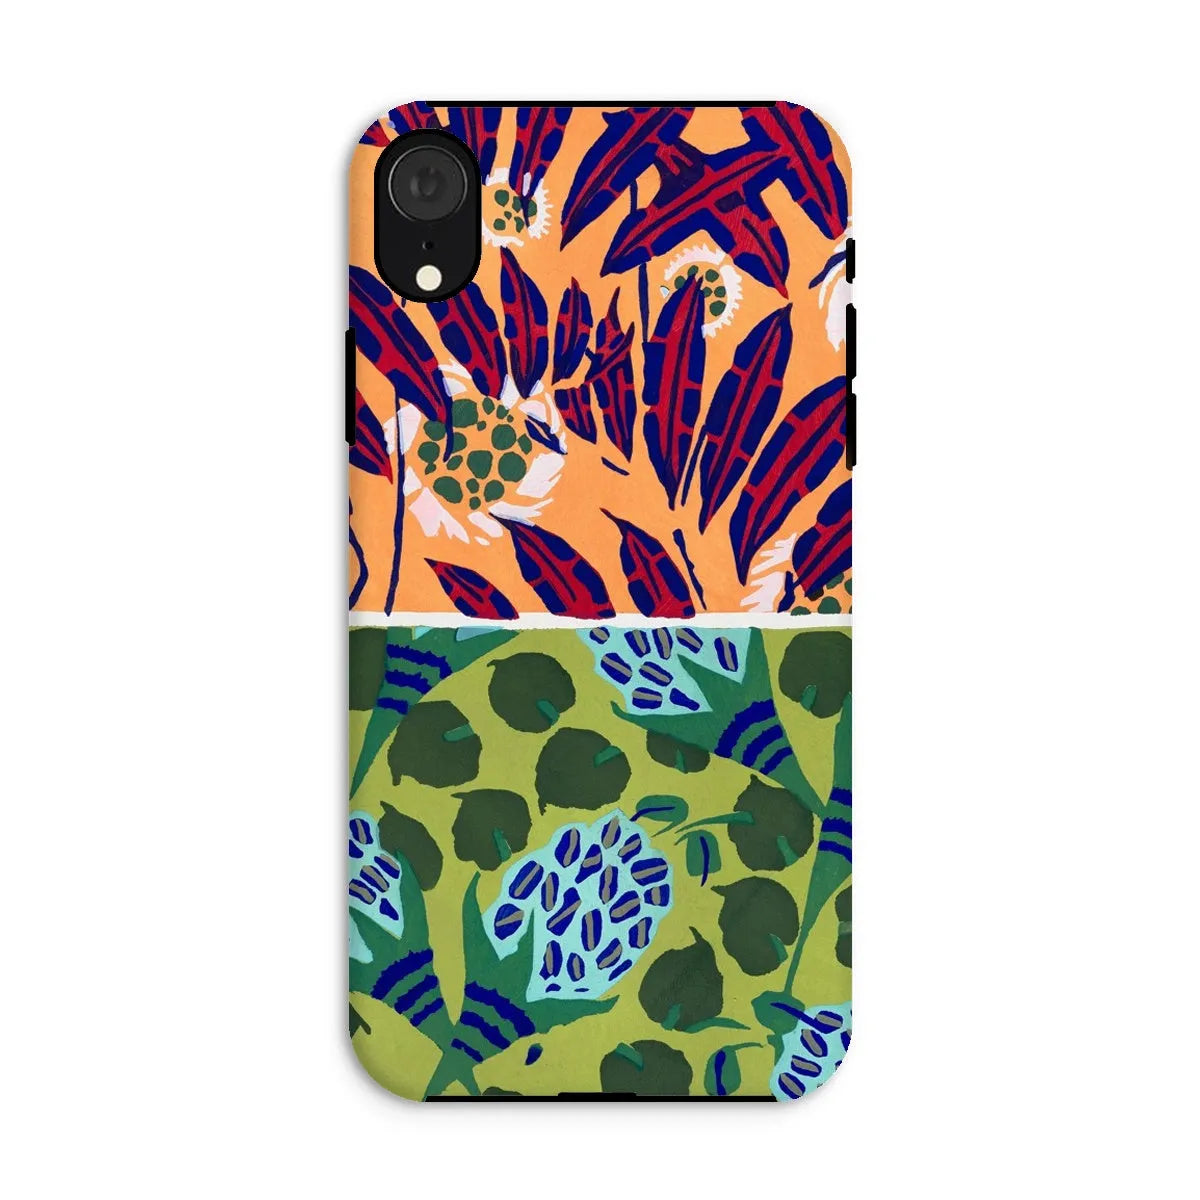 Fabric & Rugs Too - Pochoir Pattern Phone Case - E. A. Séguy - Iphone Xr / Matte - Mobile Phone Cases - Aesthetic Art